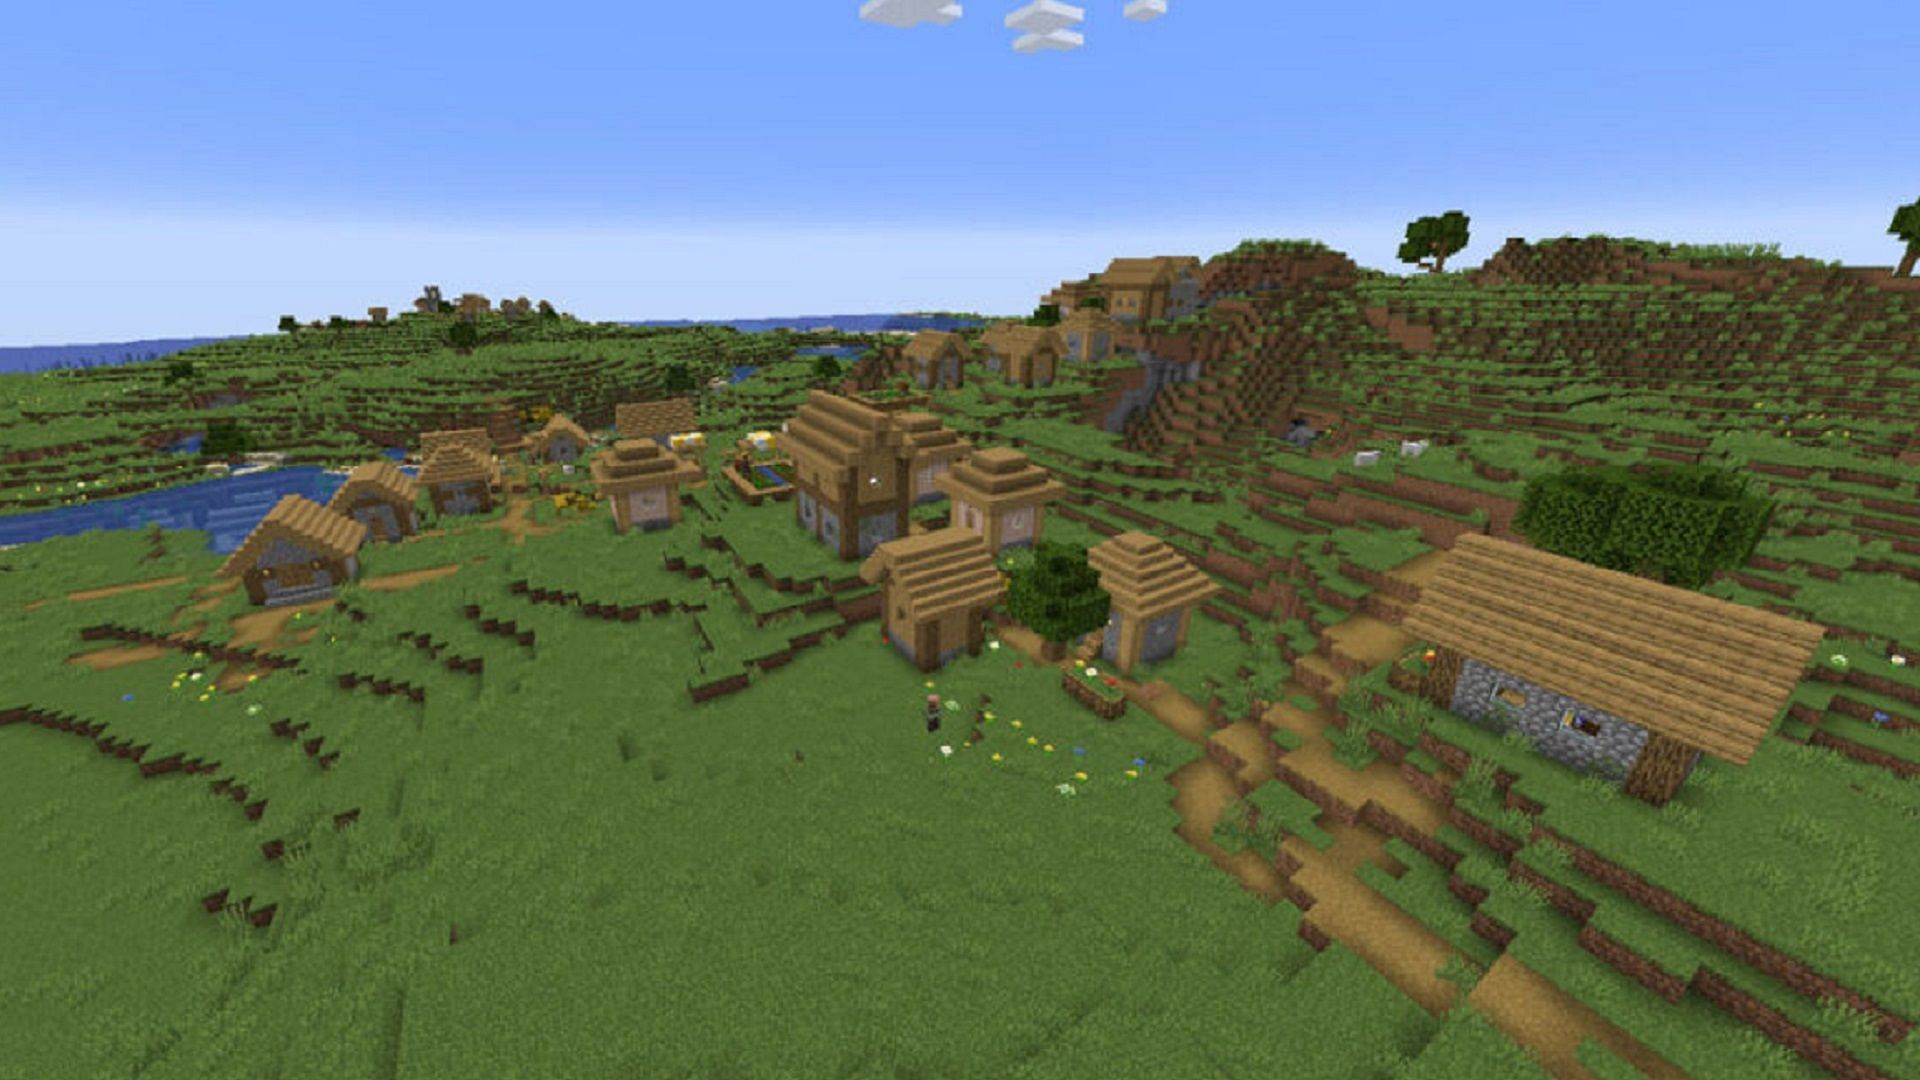 Four villages await the player immediately next to their spawn point (Image via Mojang)